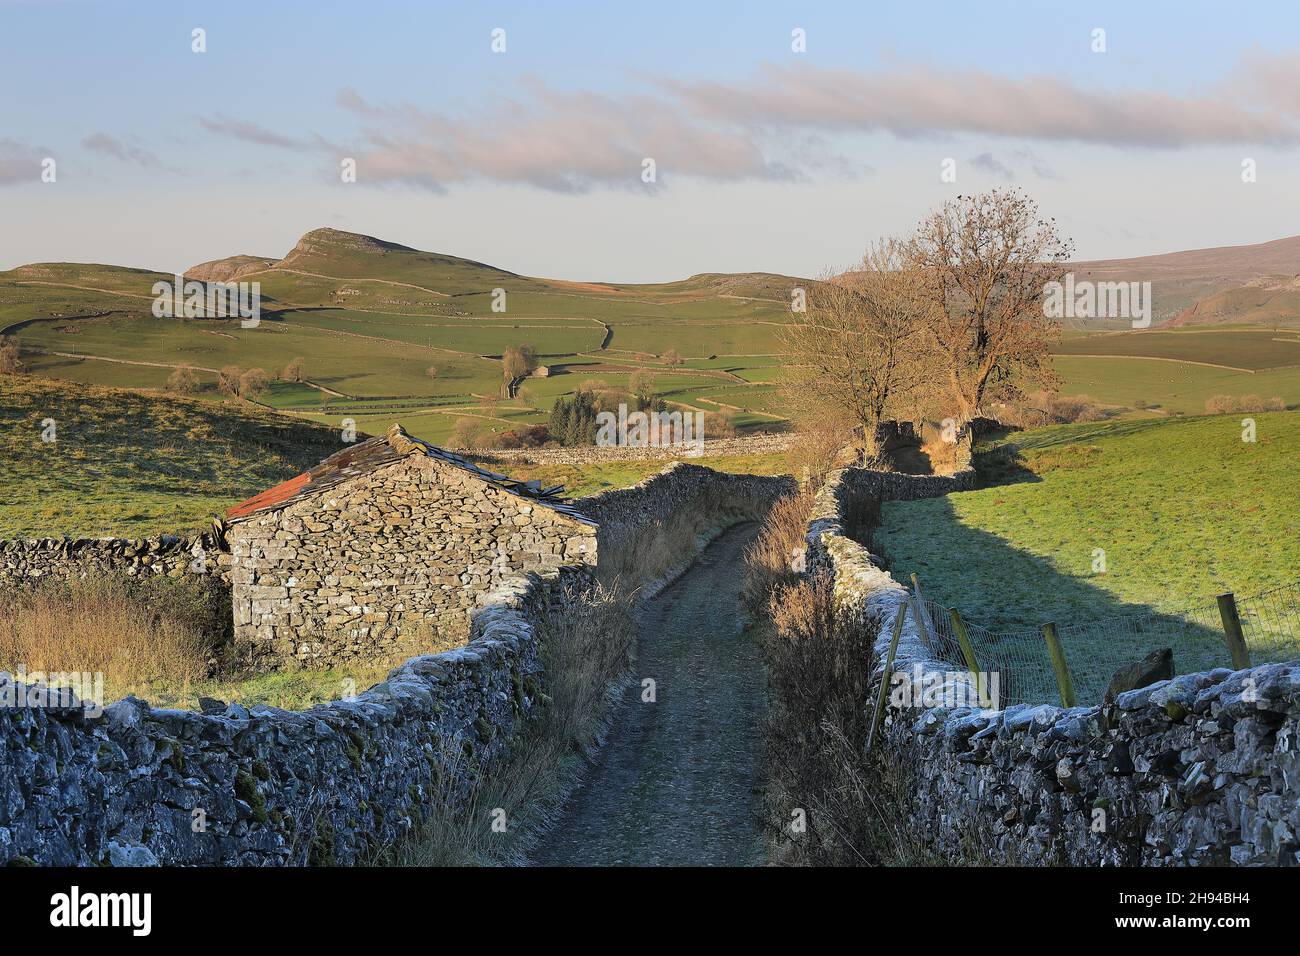 The view towards Smearsett Scar from Goat Scar Lane, above the village of Stainforth, in Ribblesdale, Yorkshire Dales National Park, UK. Stock Photo